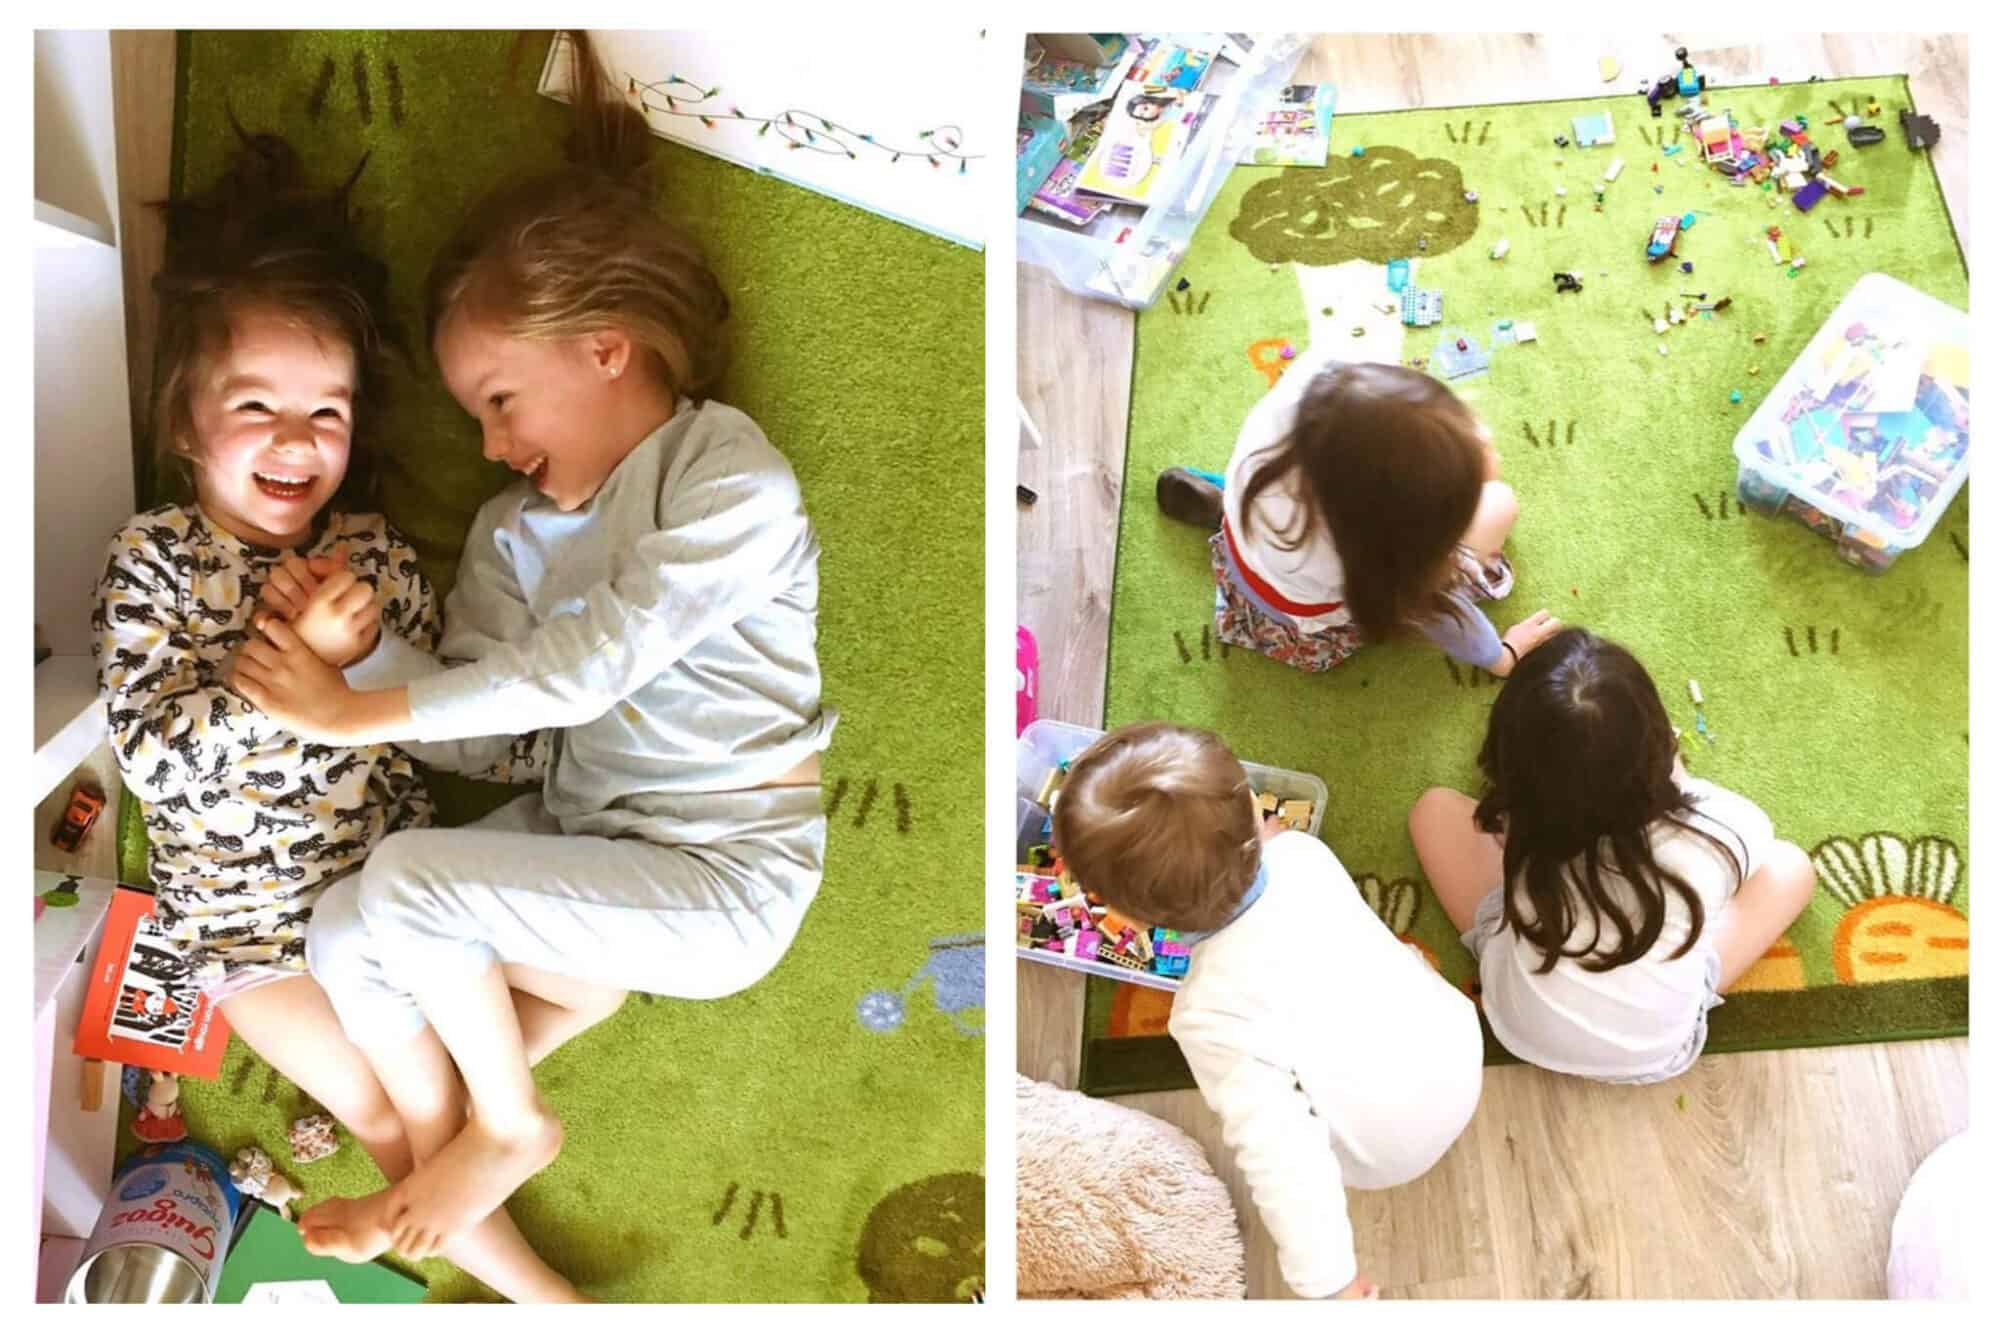 Left: Two children, one brunette and one blonde, smile while playing together atop a green carpet, Right: Three children play with legos atop a green carpet